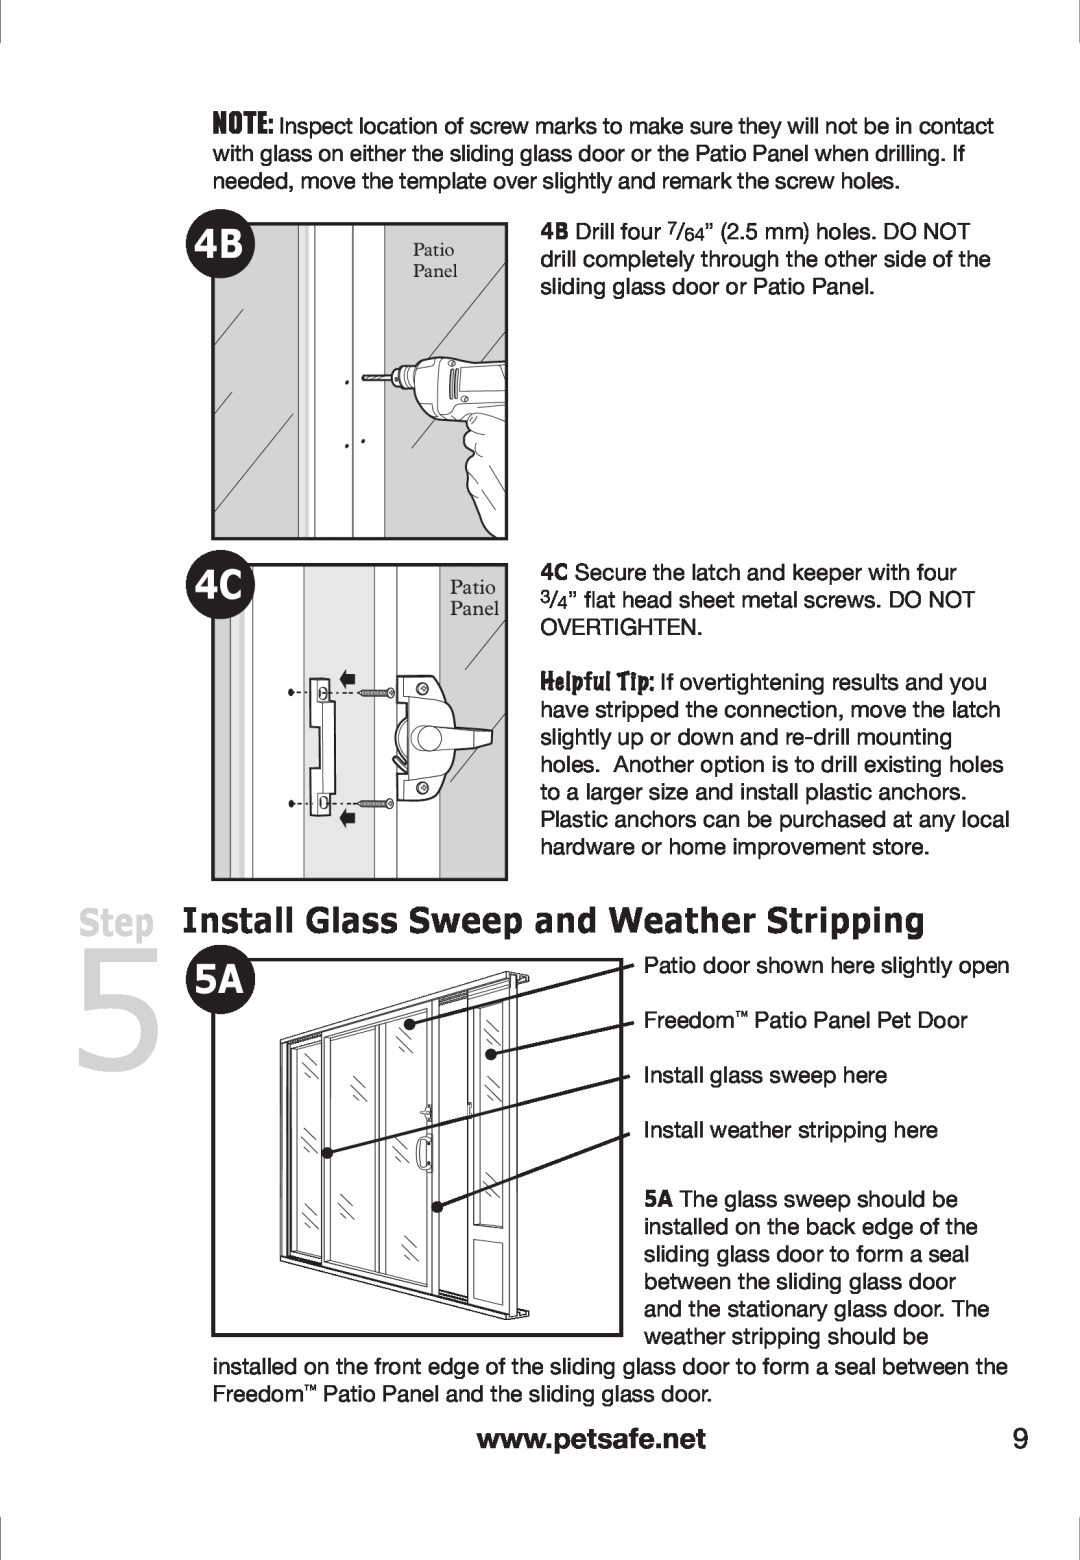 Petsafe PPA11-13128, PPA11-13141, PPA11-13135, PPA11-13134, PPA11-13129 Install Glass Sweep and Weather Stripping, Step 